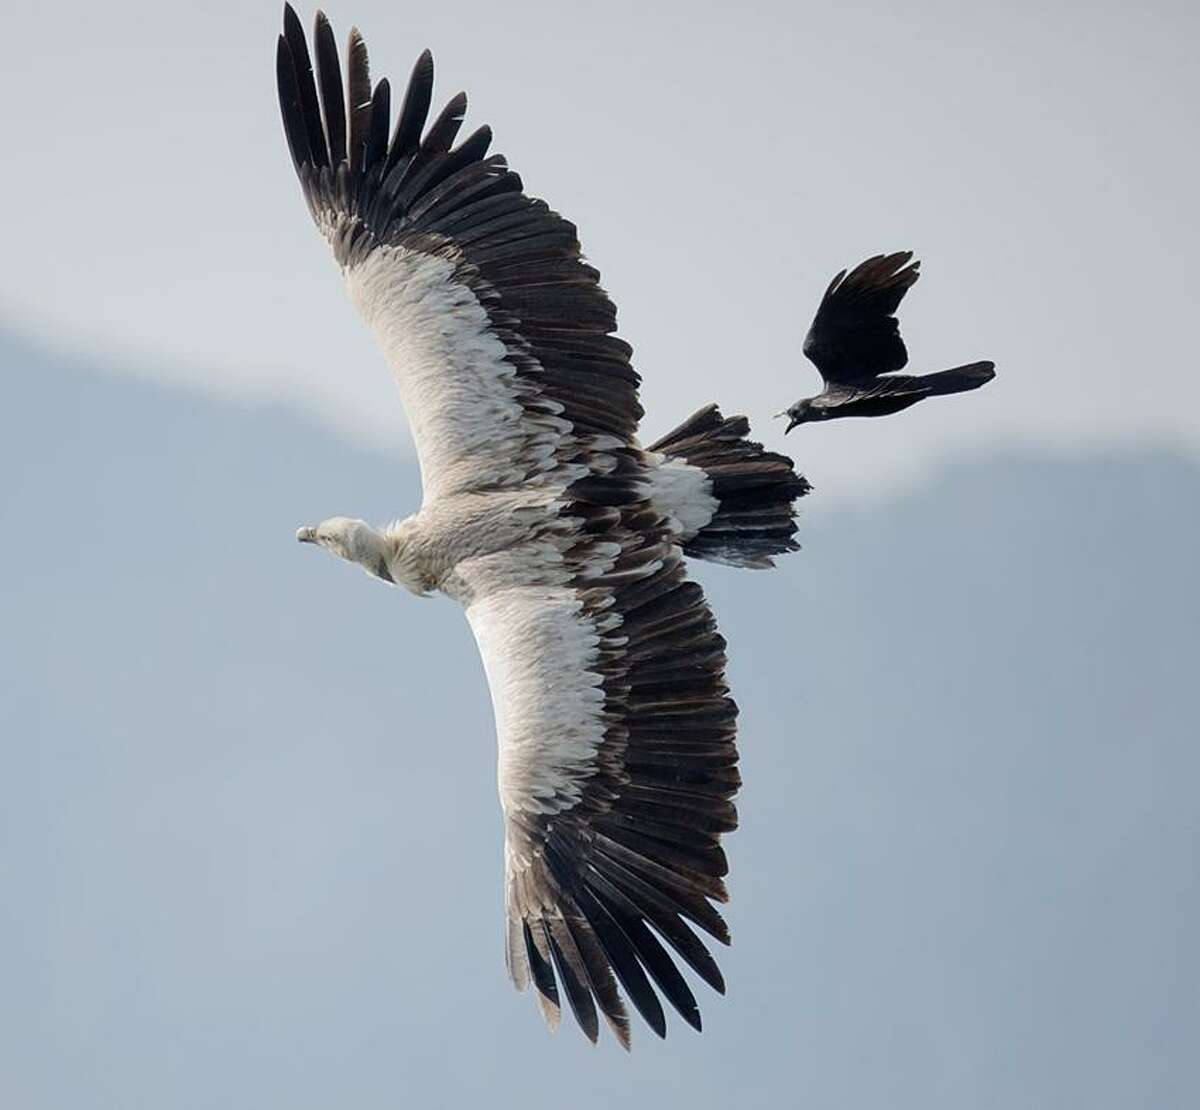 Robert DeCandido photo: A certain crow takes exception to a Himalayan vulture in its neighborhood. Vultures of Nepal will be the topic of the New Haven Bird Club meeting this week.